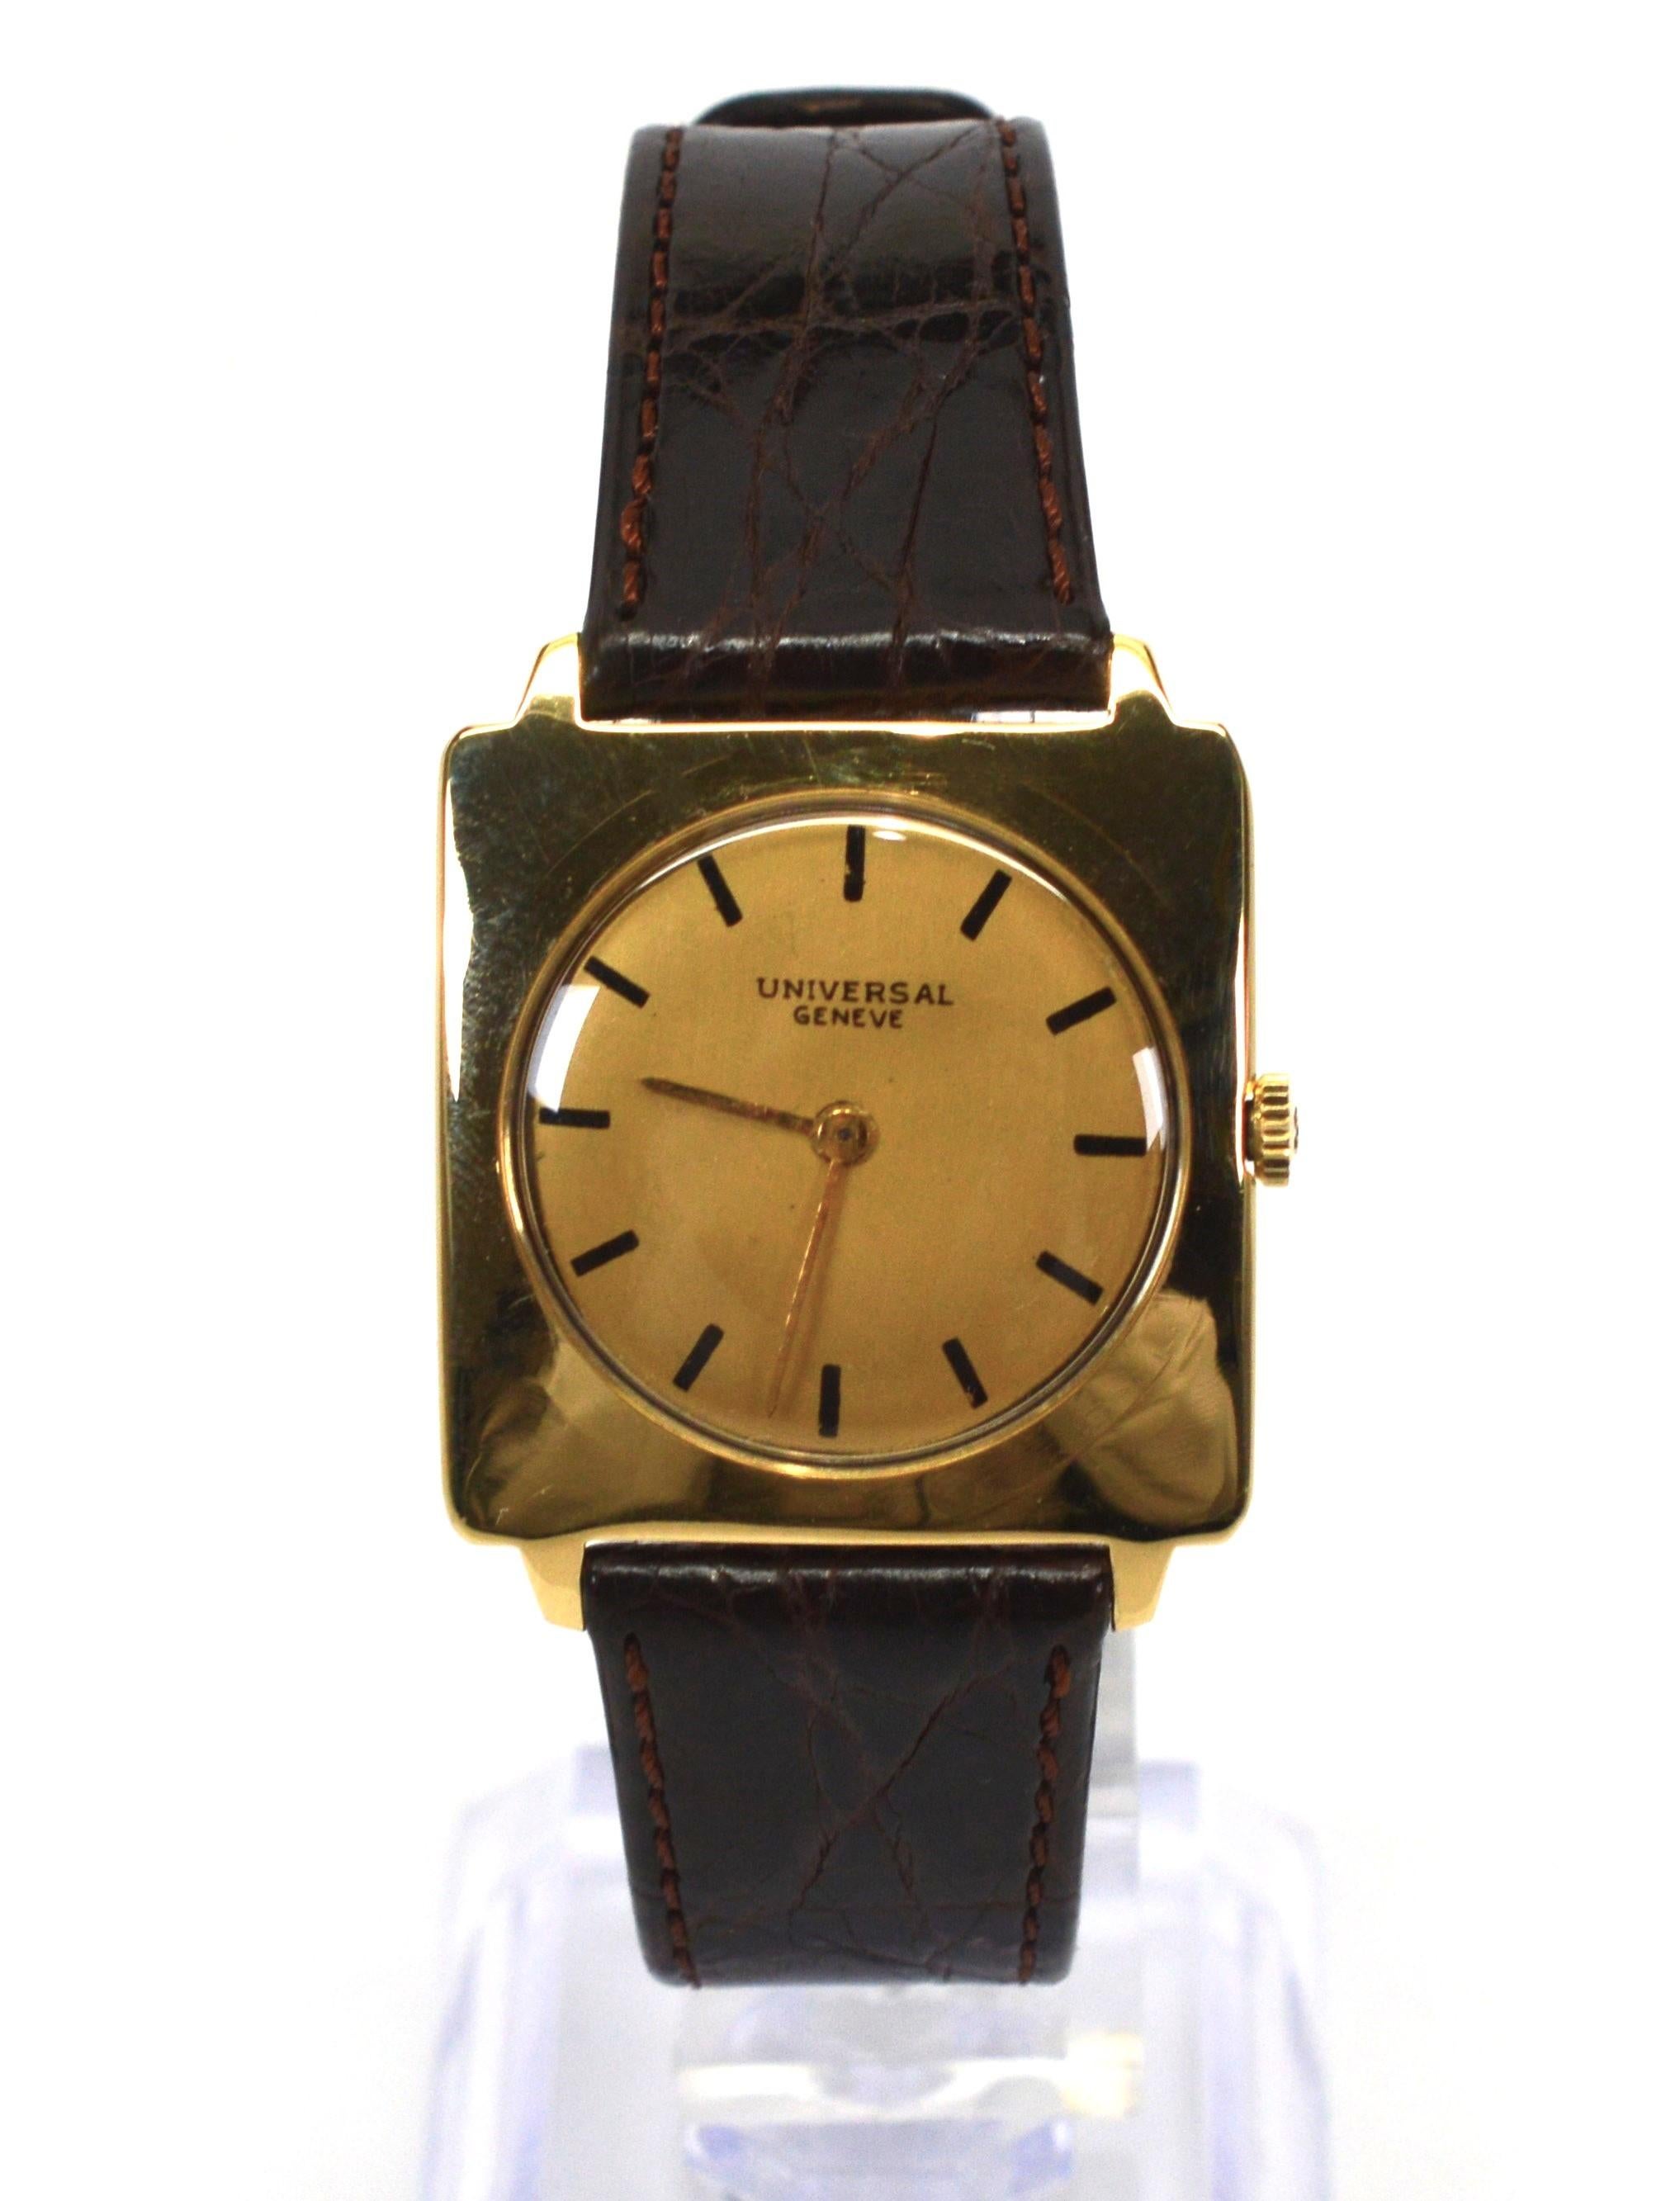 Universal 18K Yellow Gold Model 820 Men's Wrist Watch In Good Condition For Sale In Mount Kisco, NY